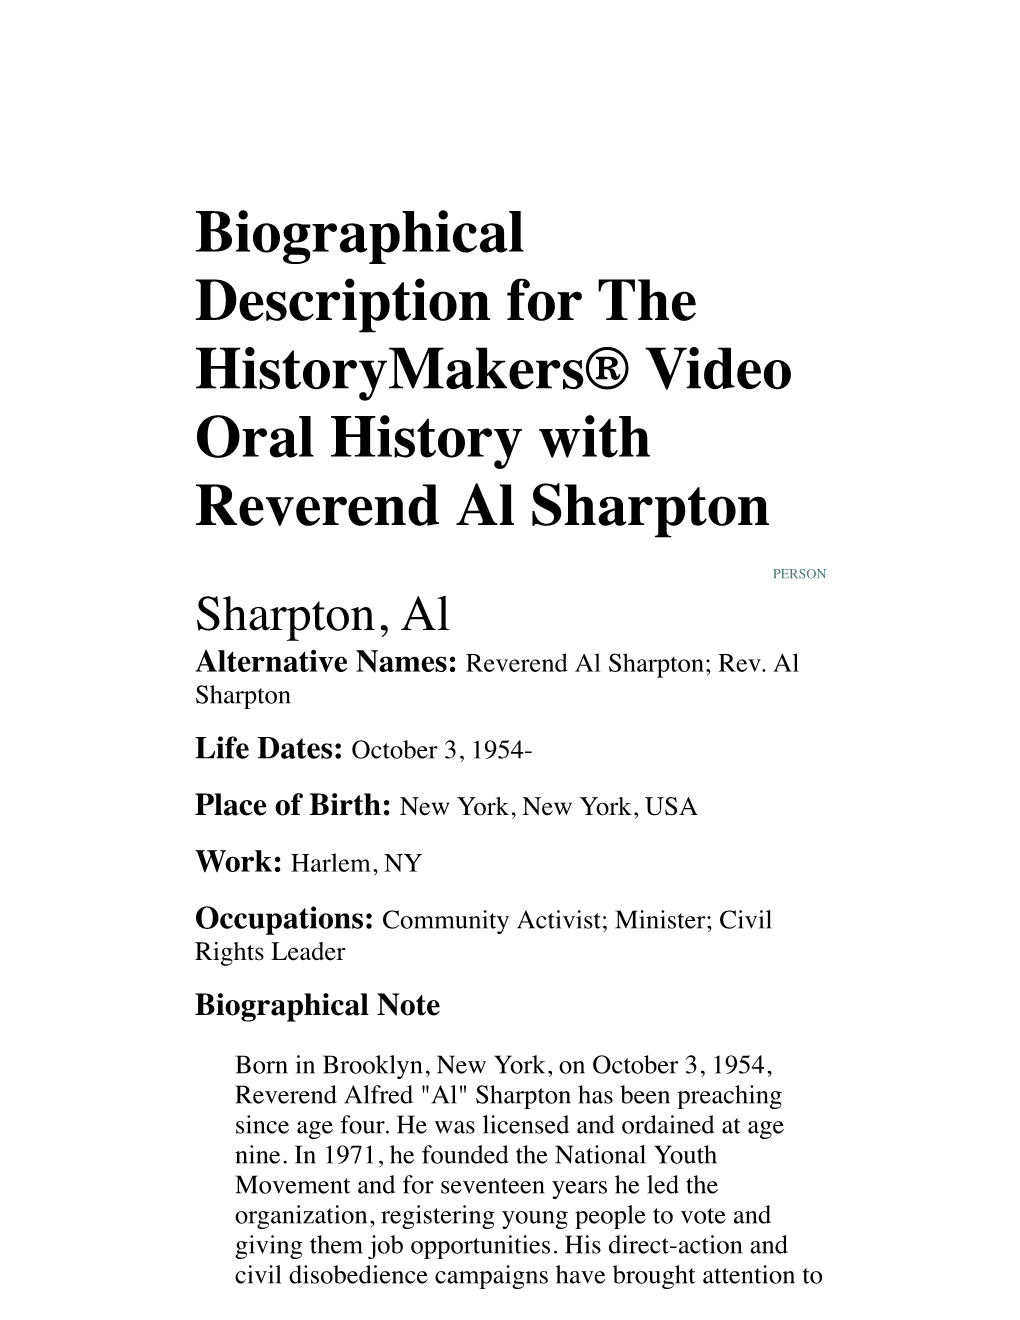 Biographical Description for the Historymakers® Video Oral History with Reverend Al Sharpton